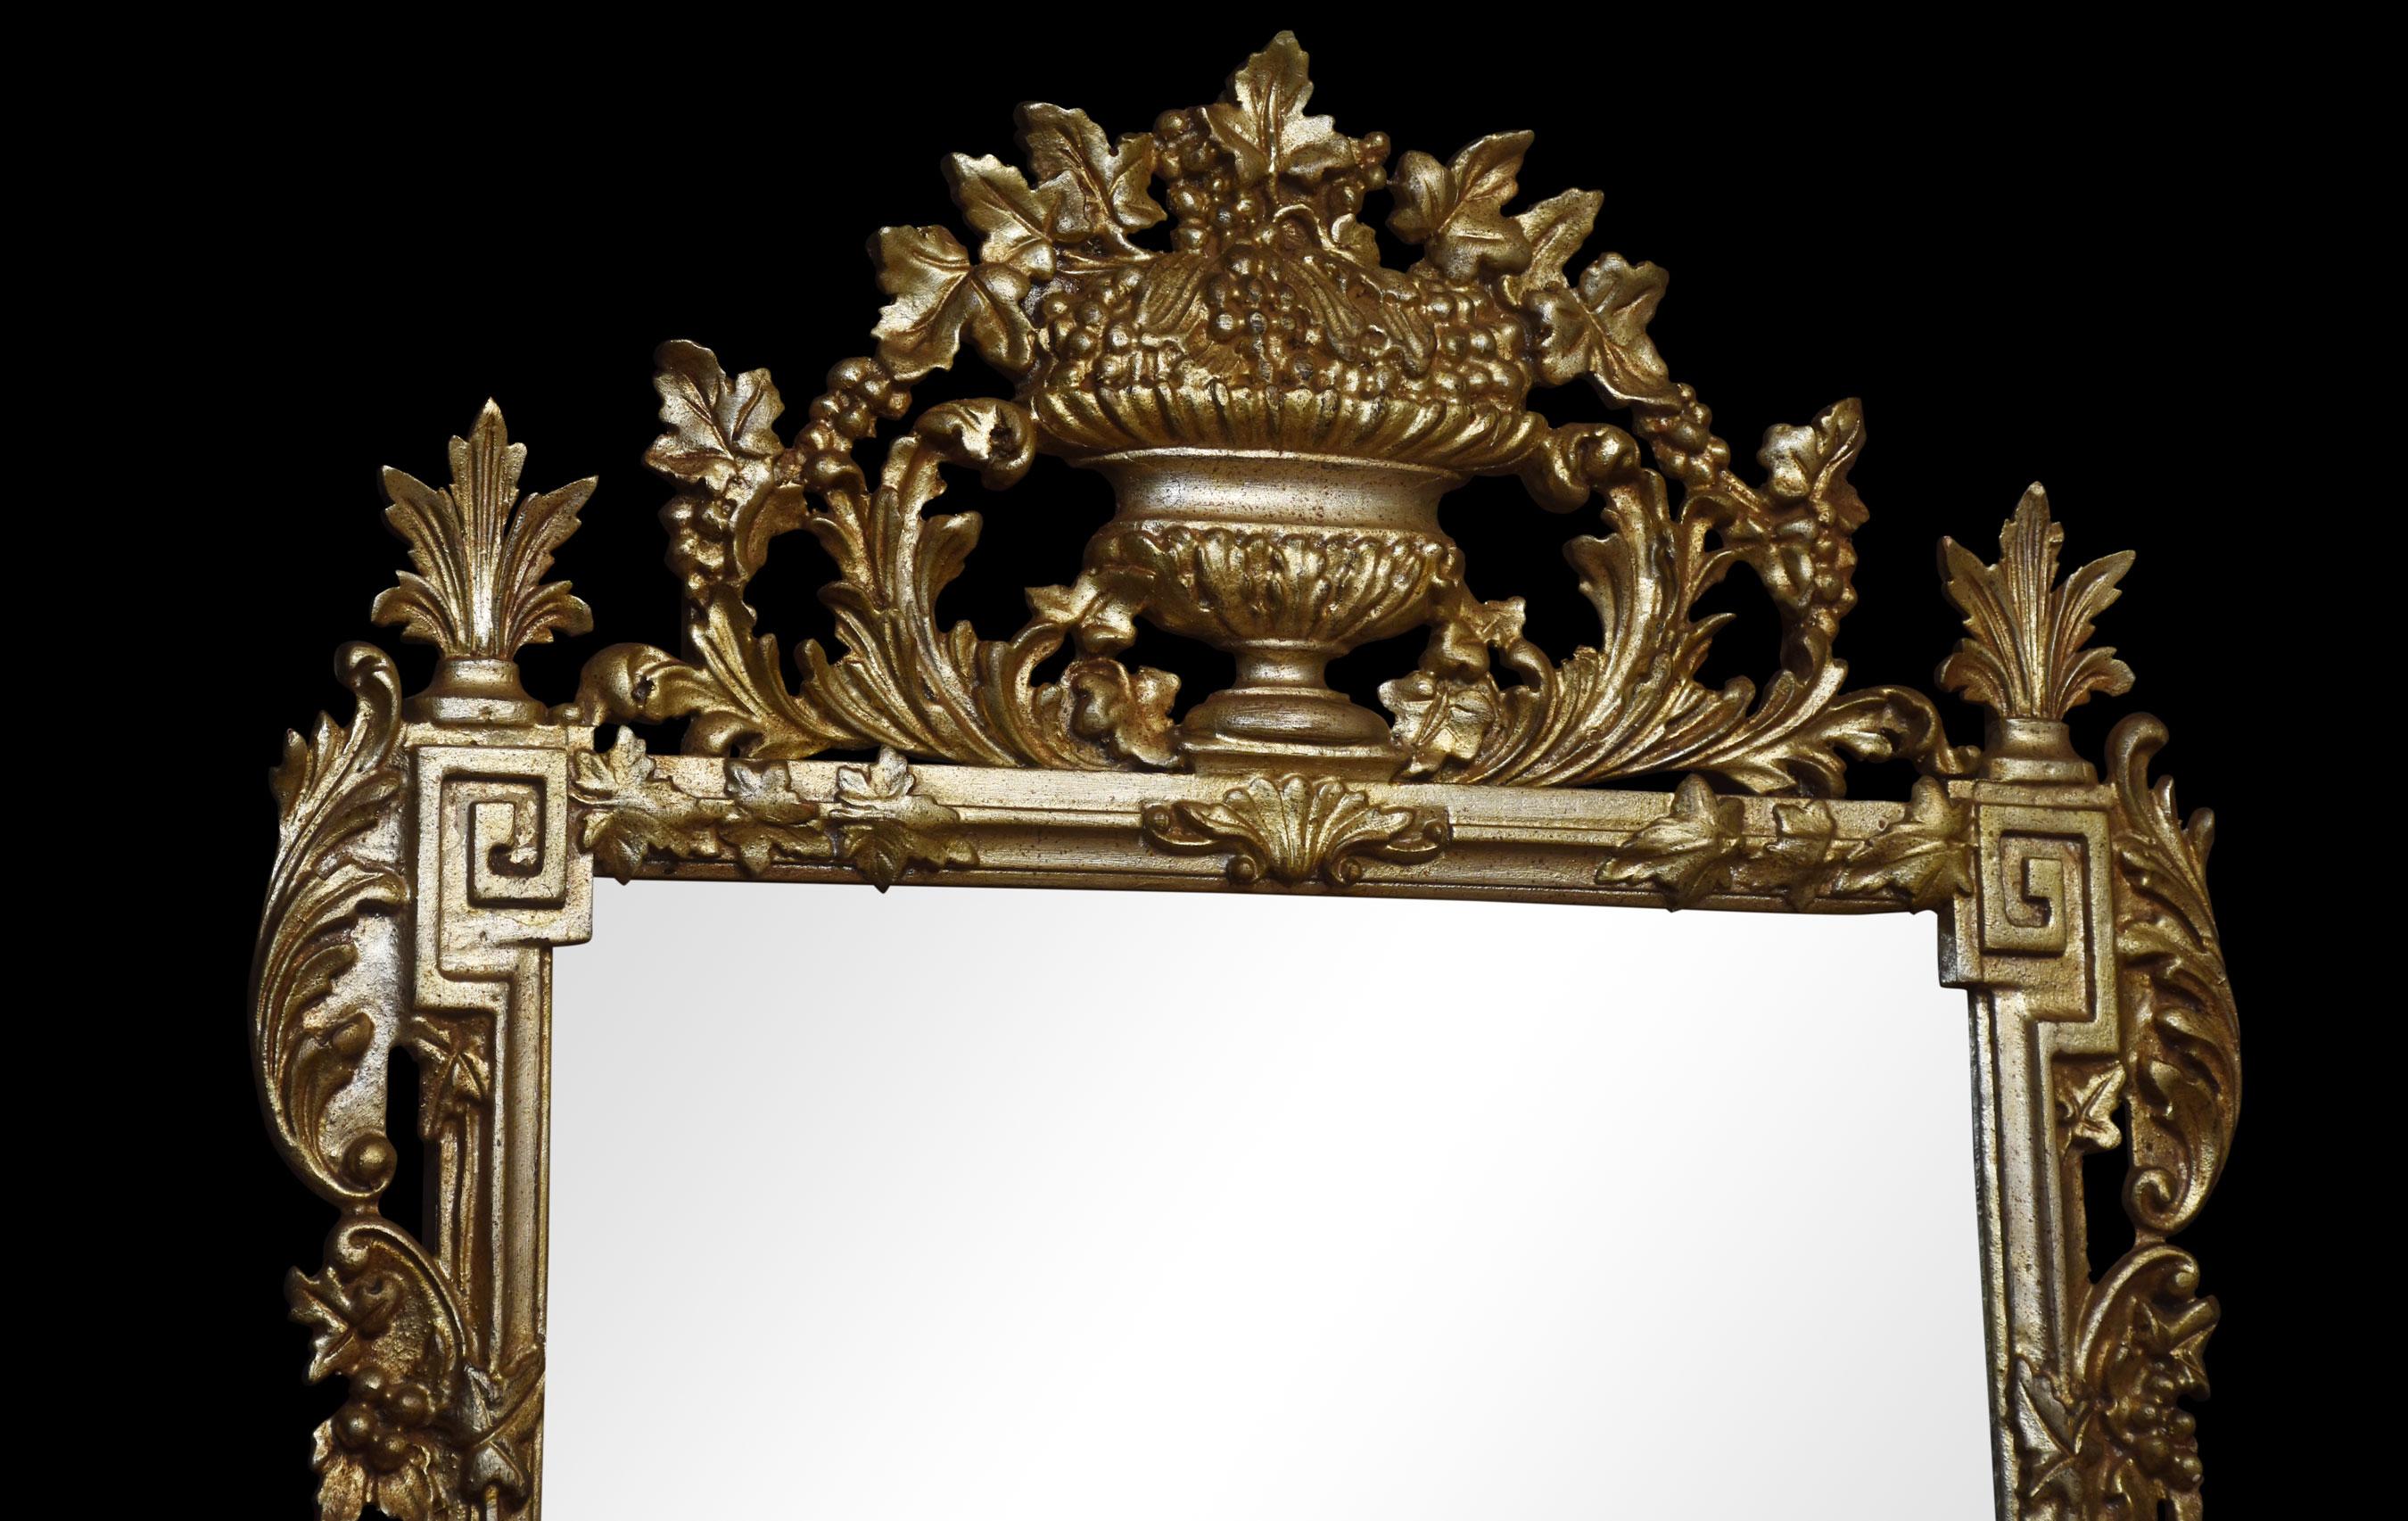 18th Century Venetian-Style Silvered Wall Mirror In Good Condition For Sale In Cheshire, GB